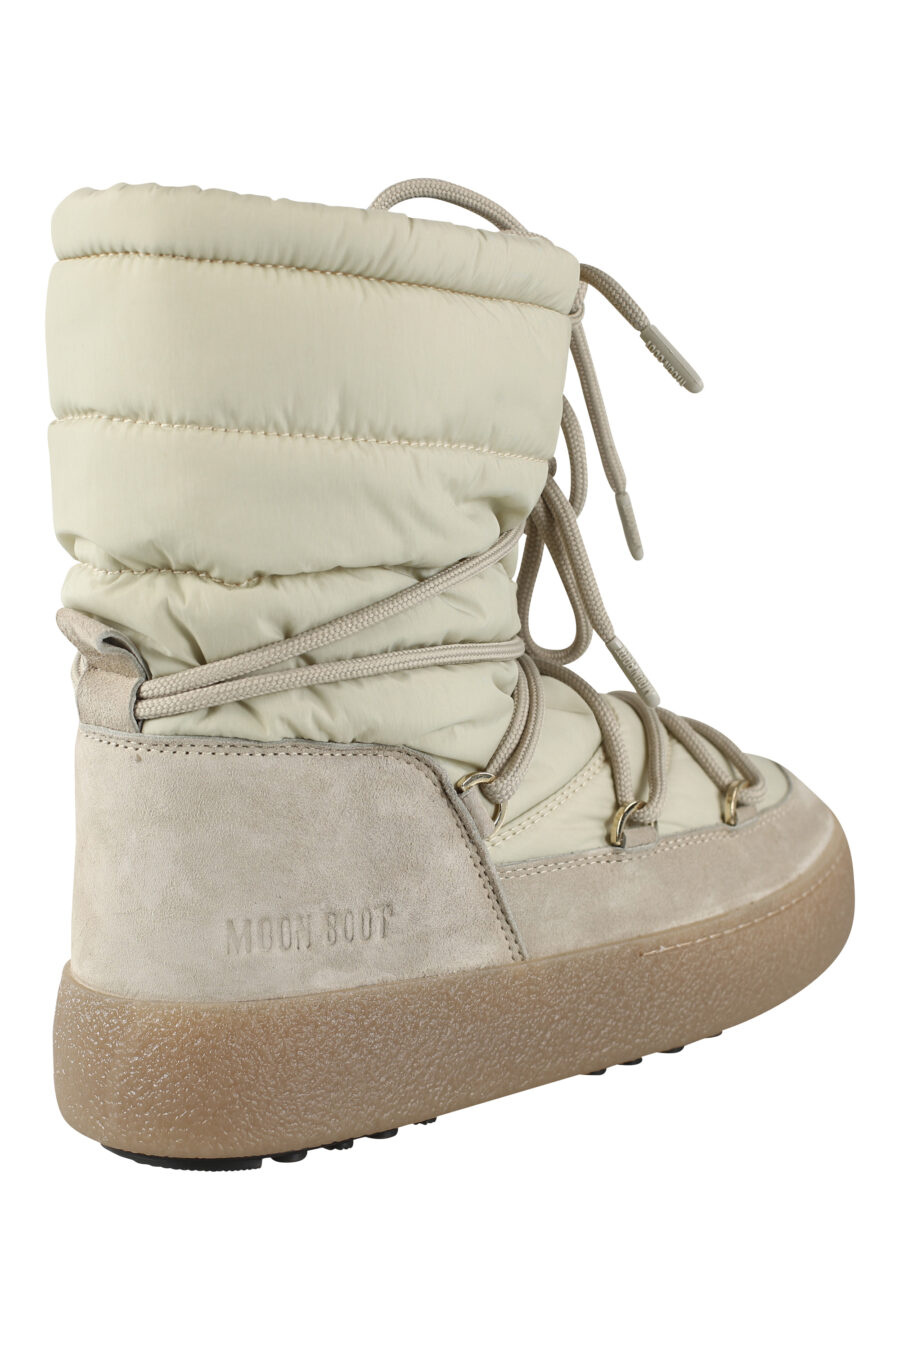 Sand coloured short snow boots with logo - IMG 9625